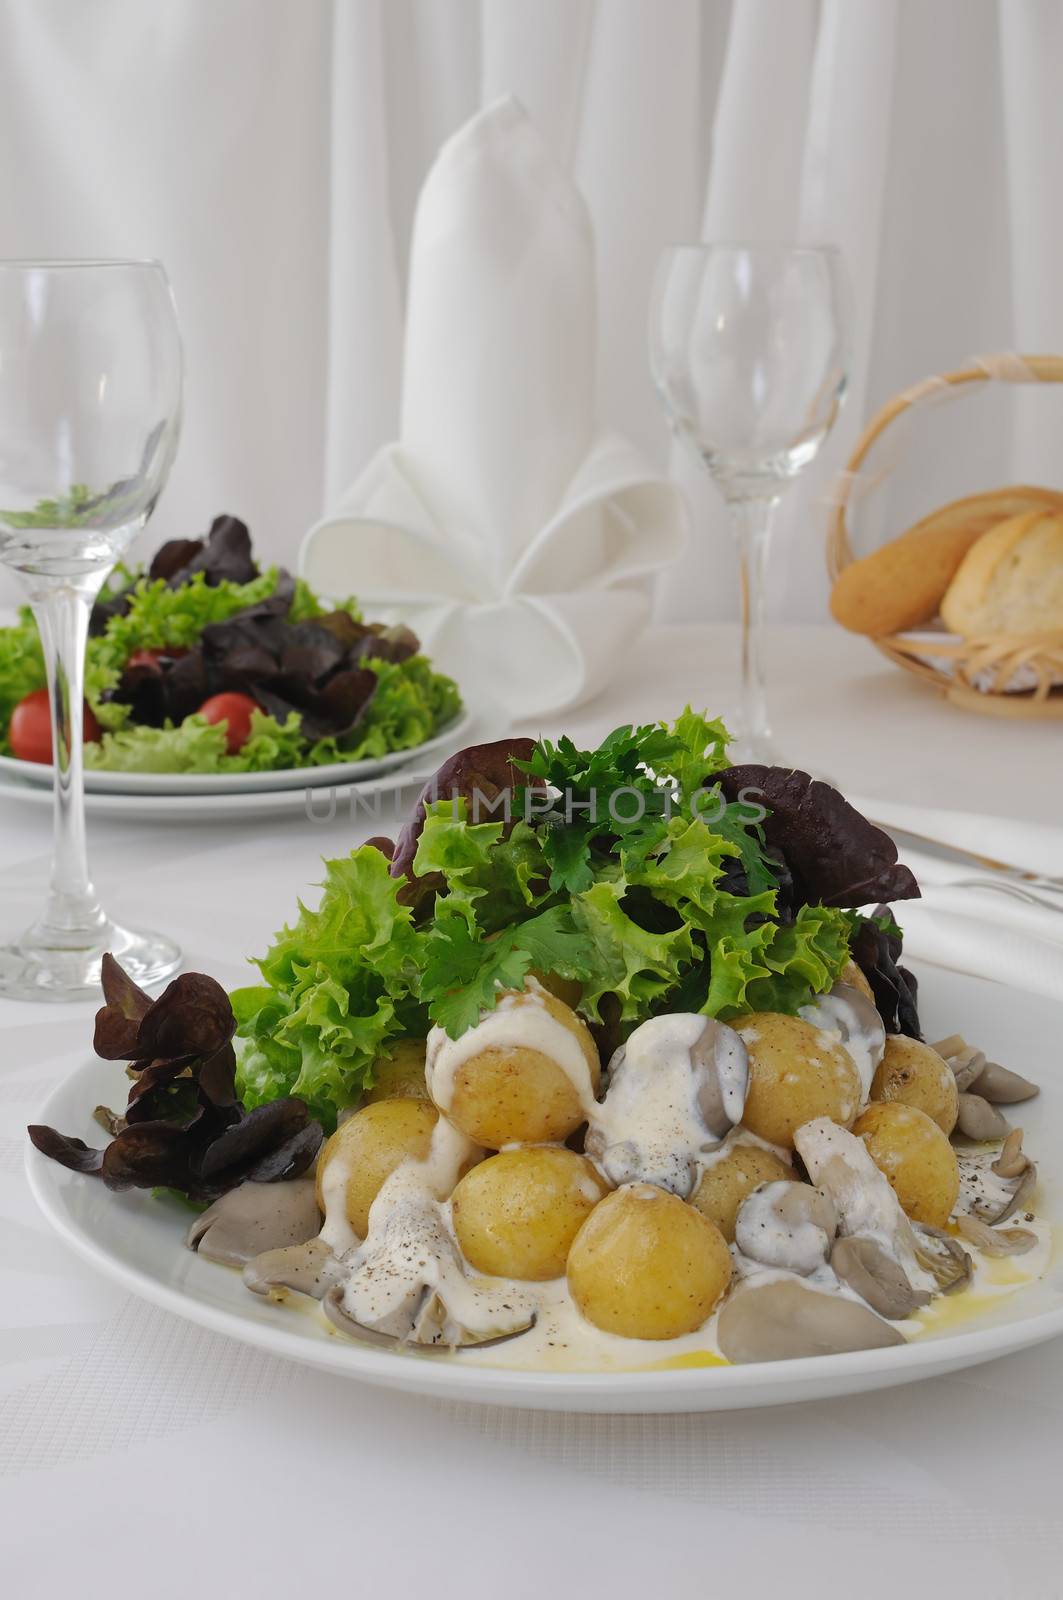  Fried potatoes with mushrooms and cream sauce in lettuce leaves